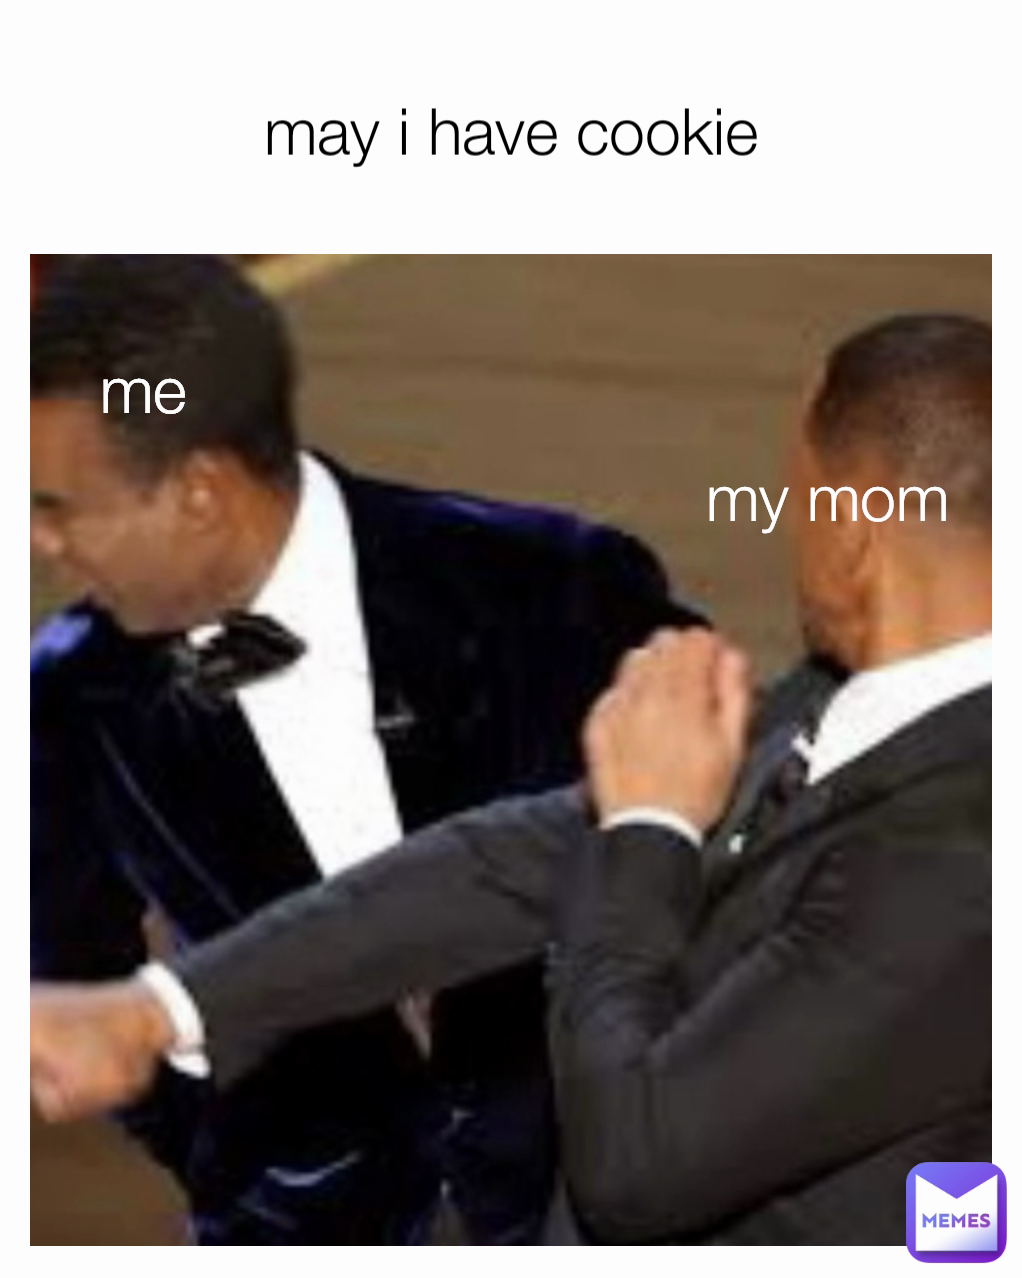 me my mom may i have cookie